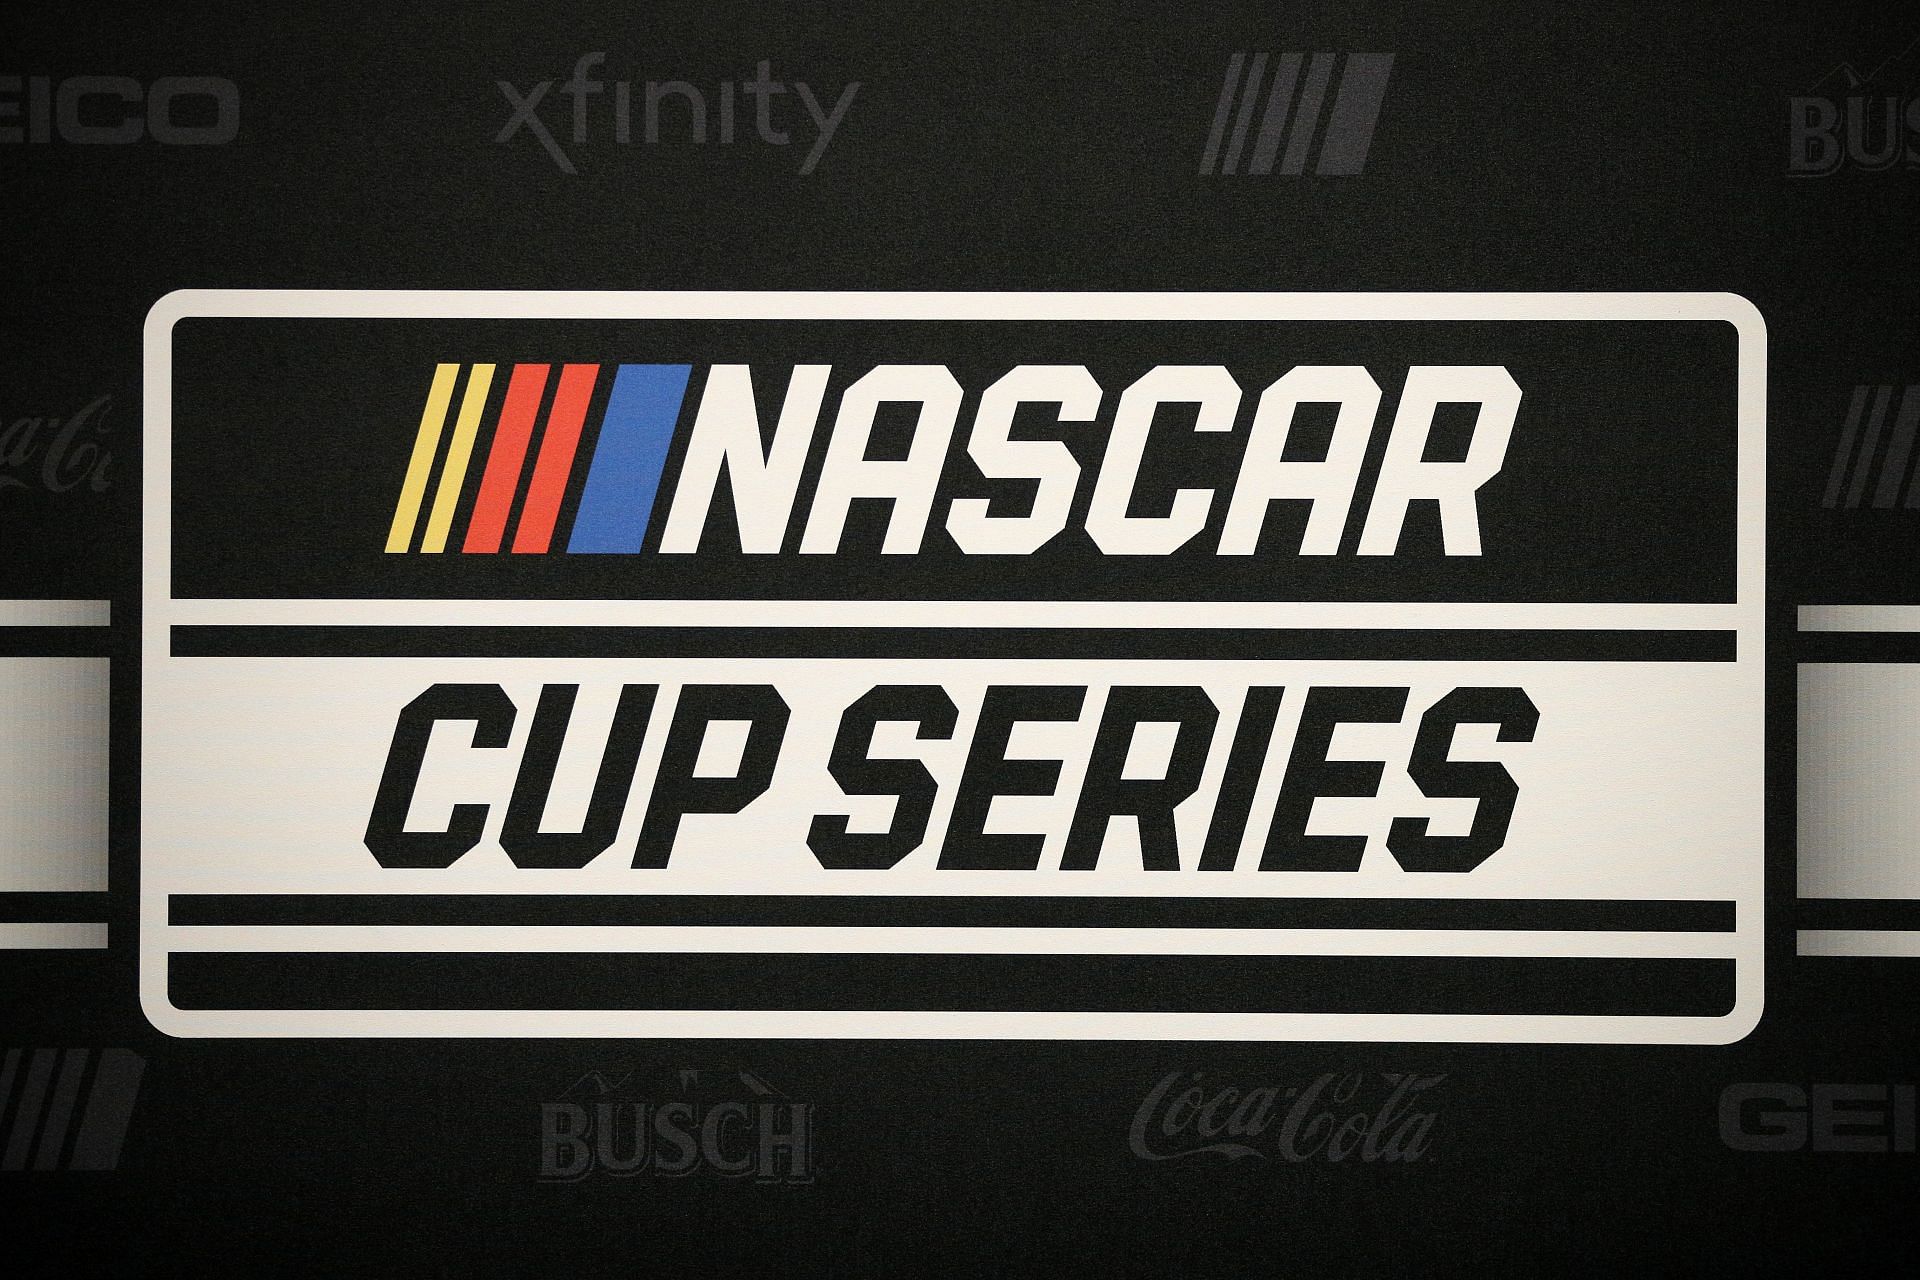 A view of the new NASCAR Cup Series logo